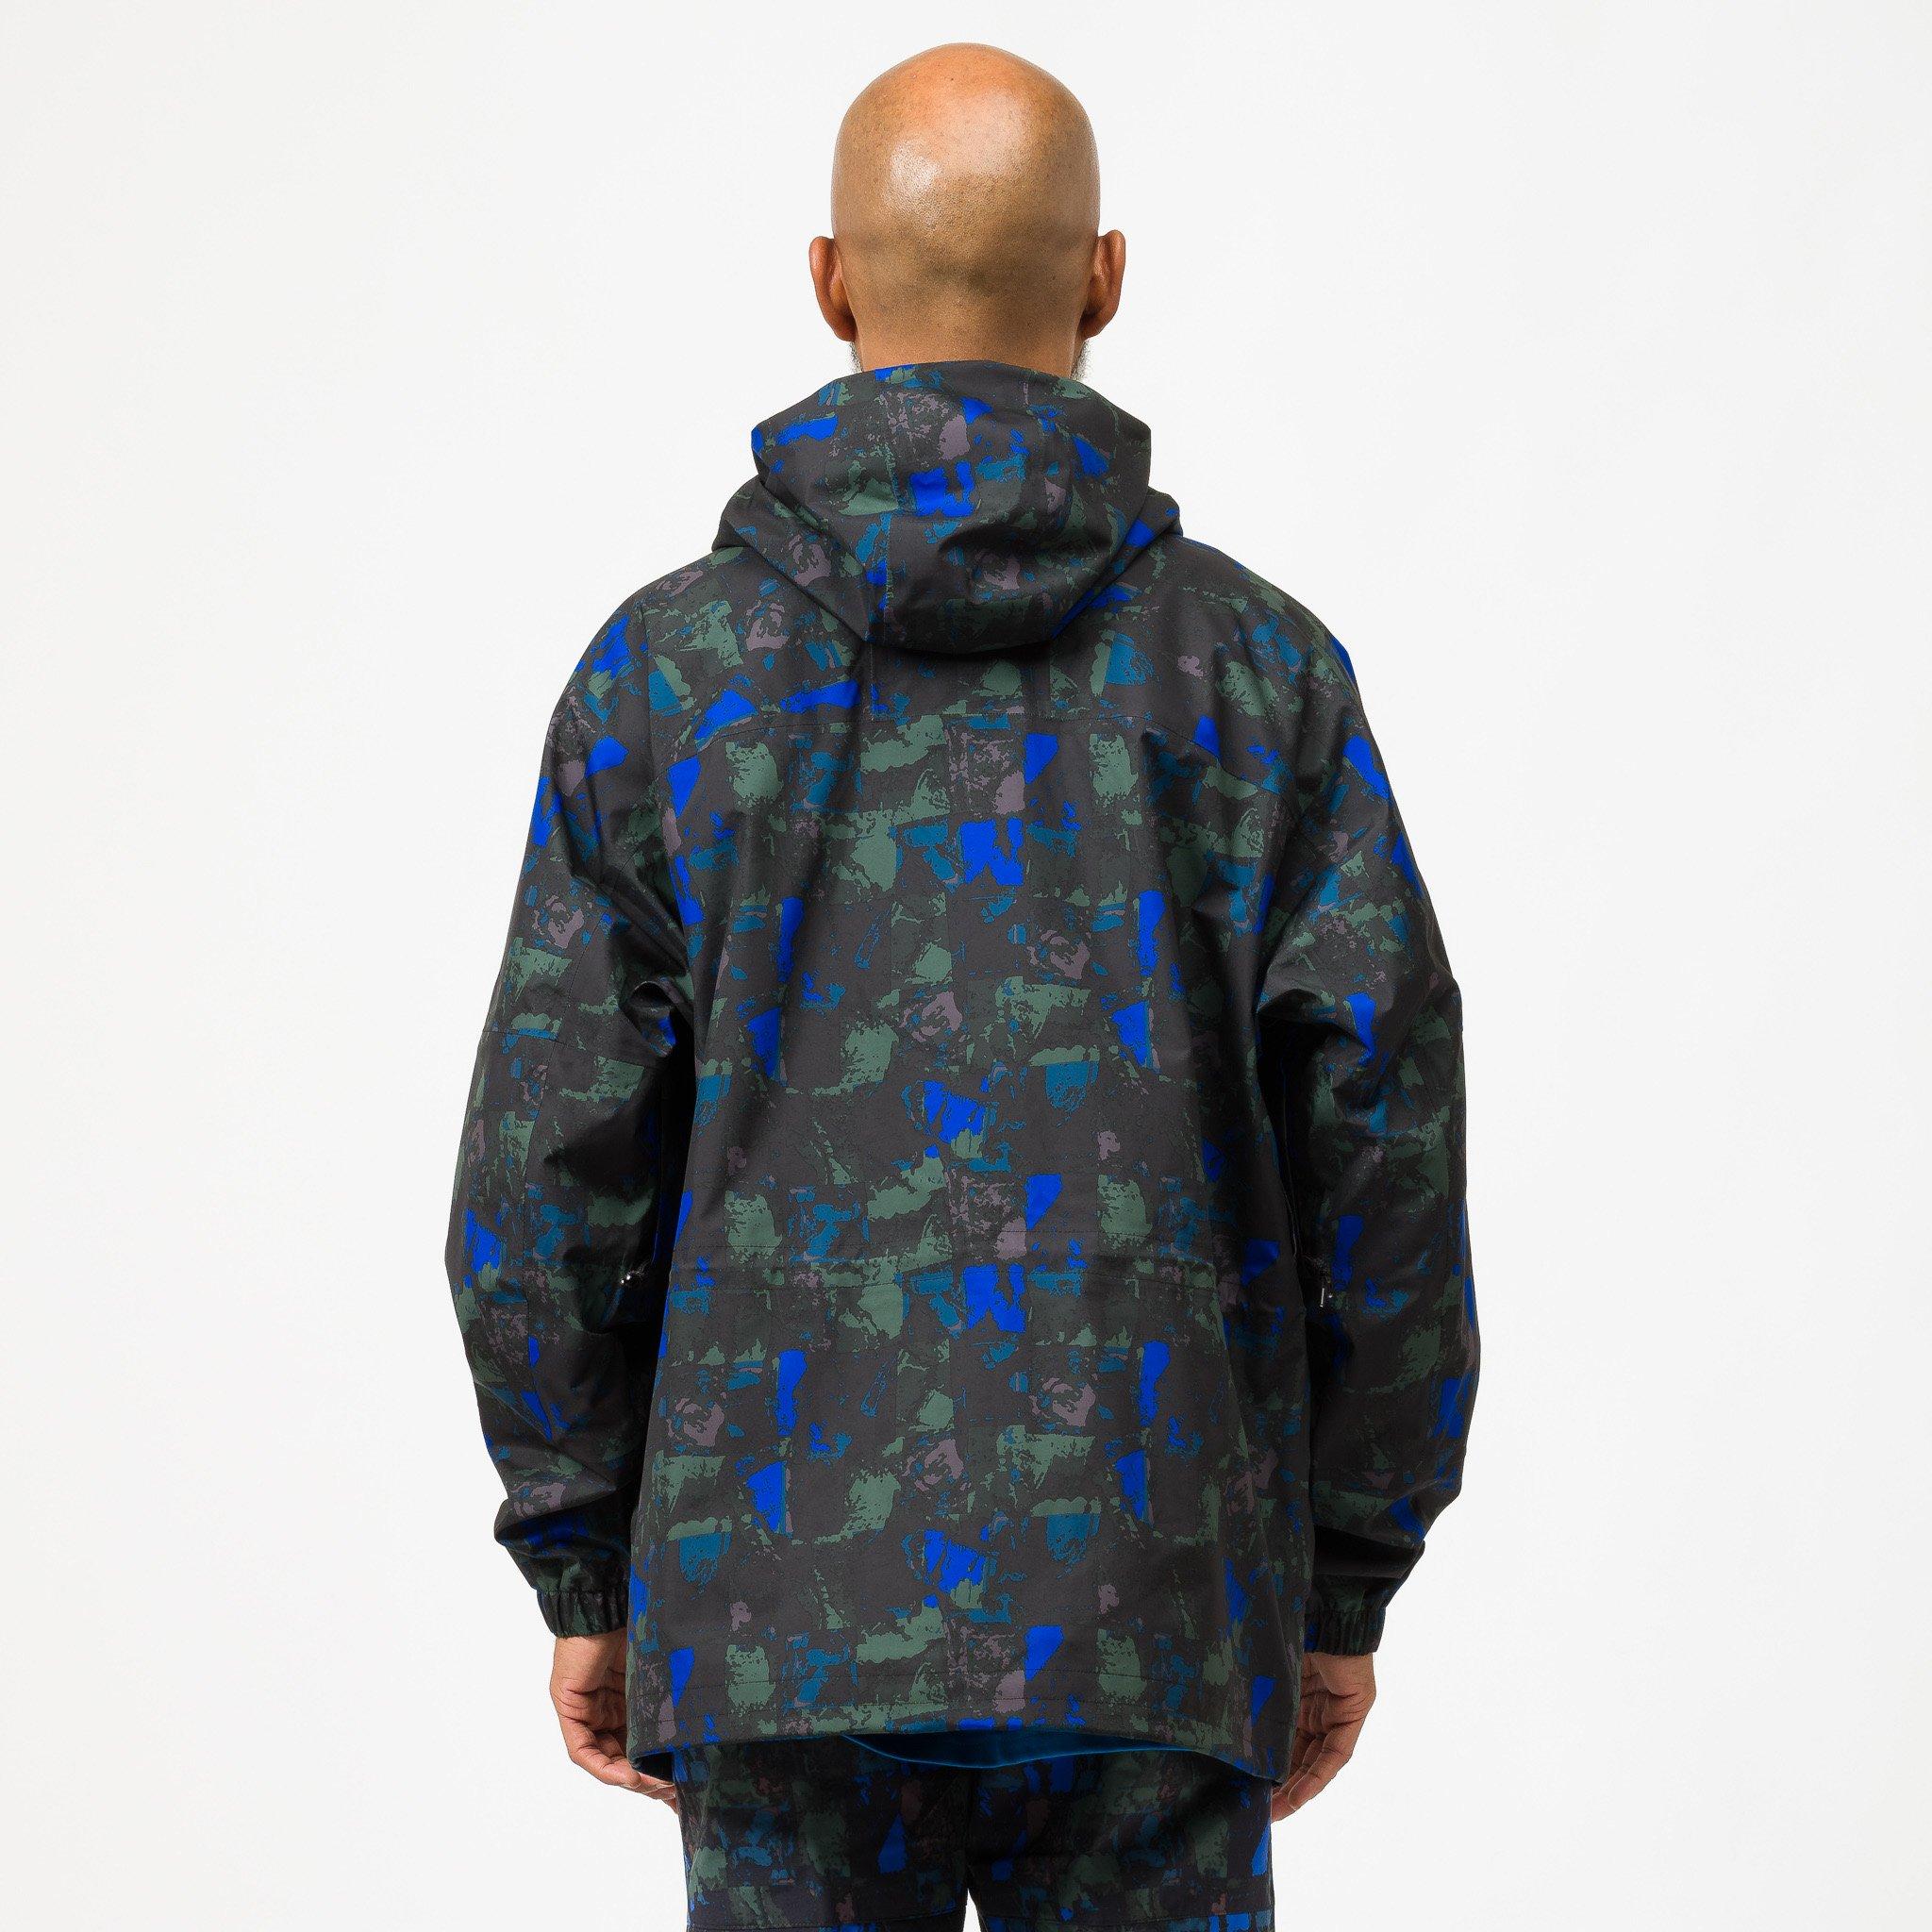 Nike Wool Acg Gore-tex Allover Print Jacket in Blue for Men - Lyst